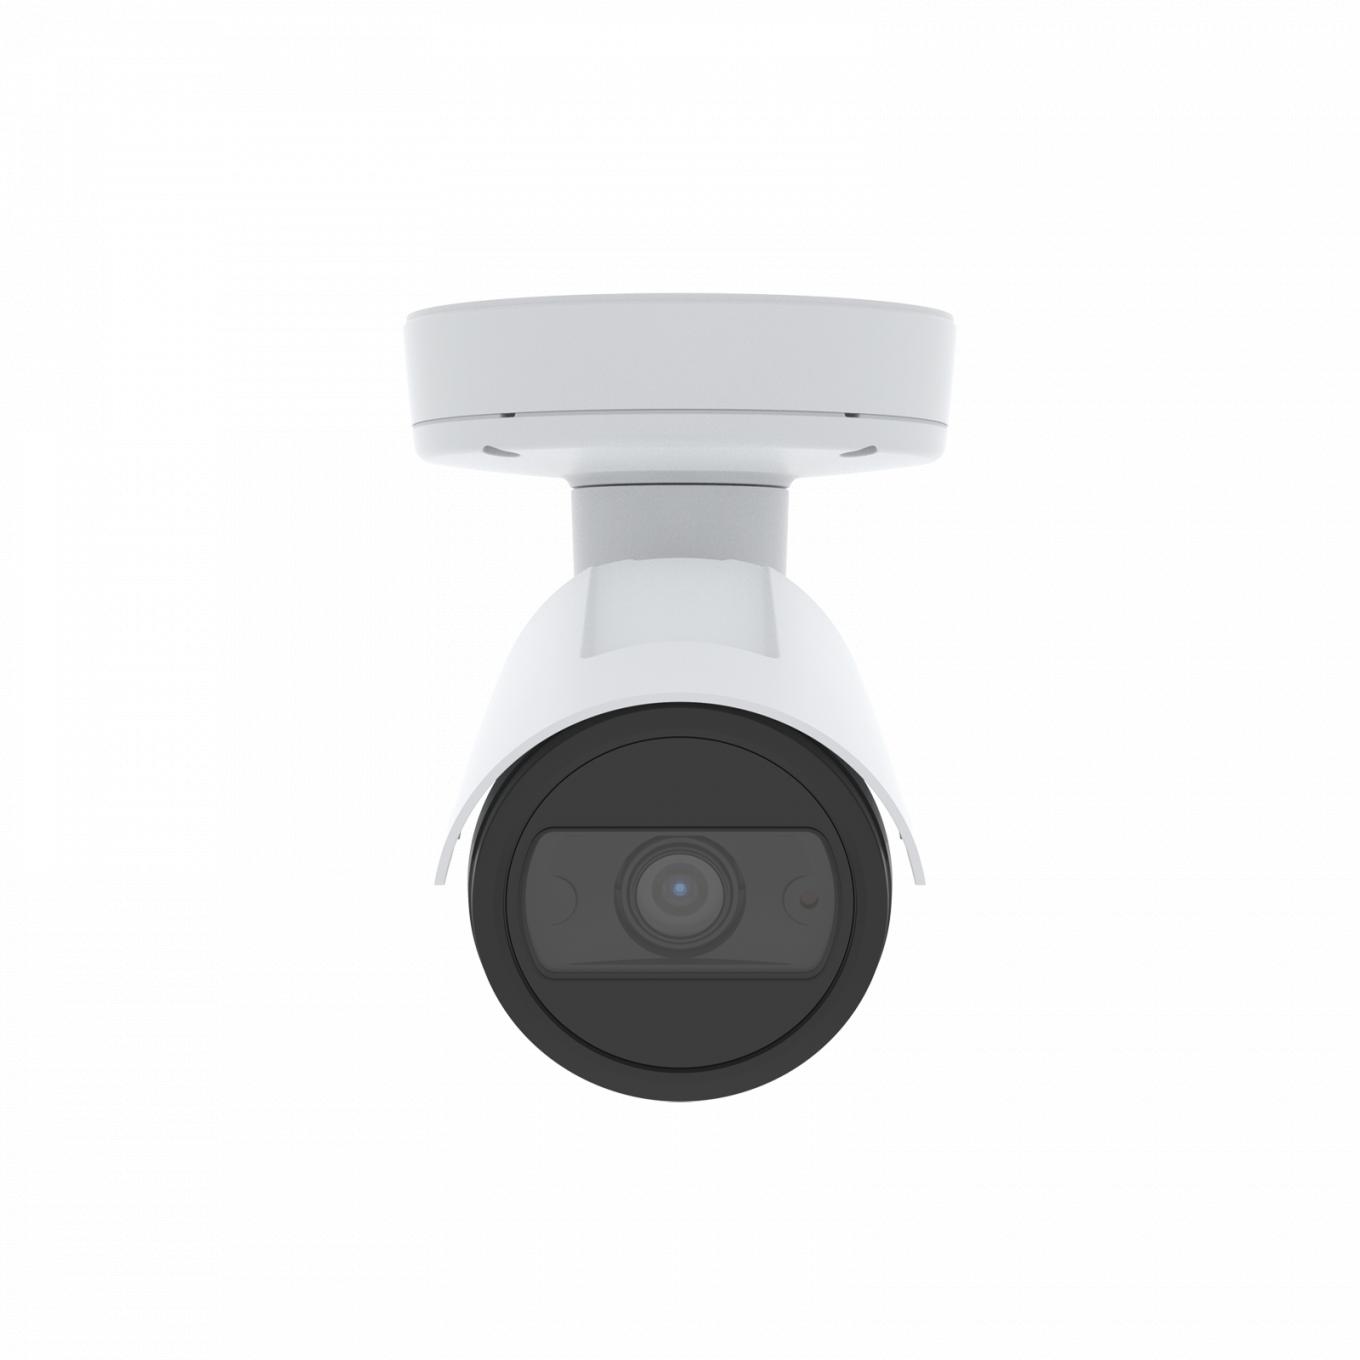 AXIS P1455-LE Network Camera | Axis Communications